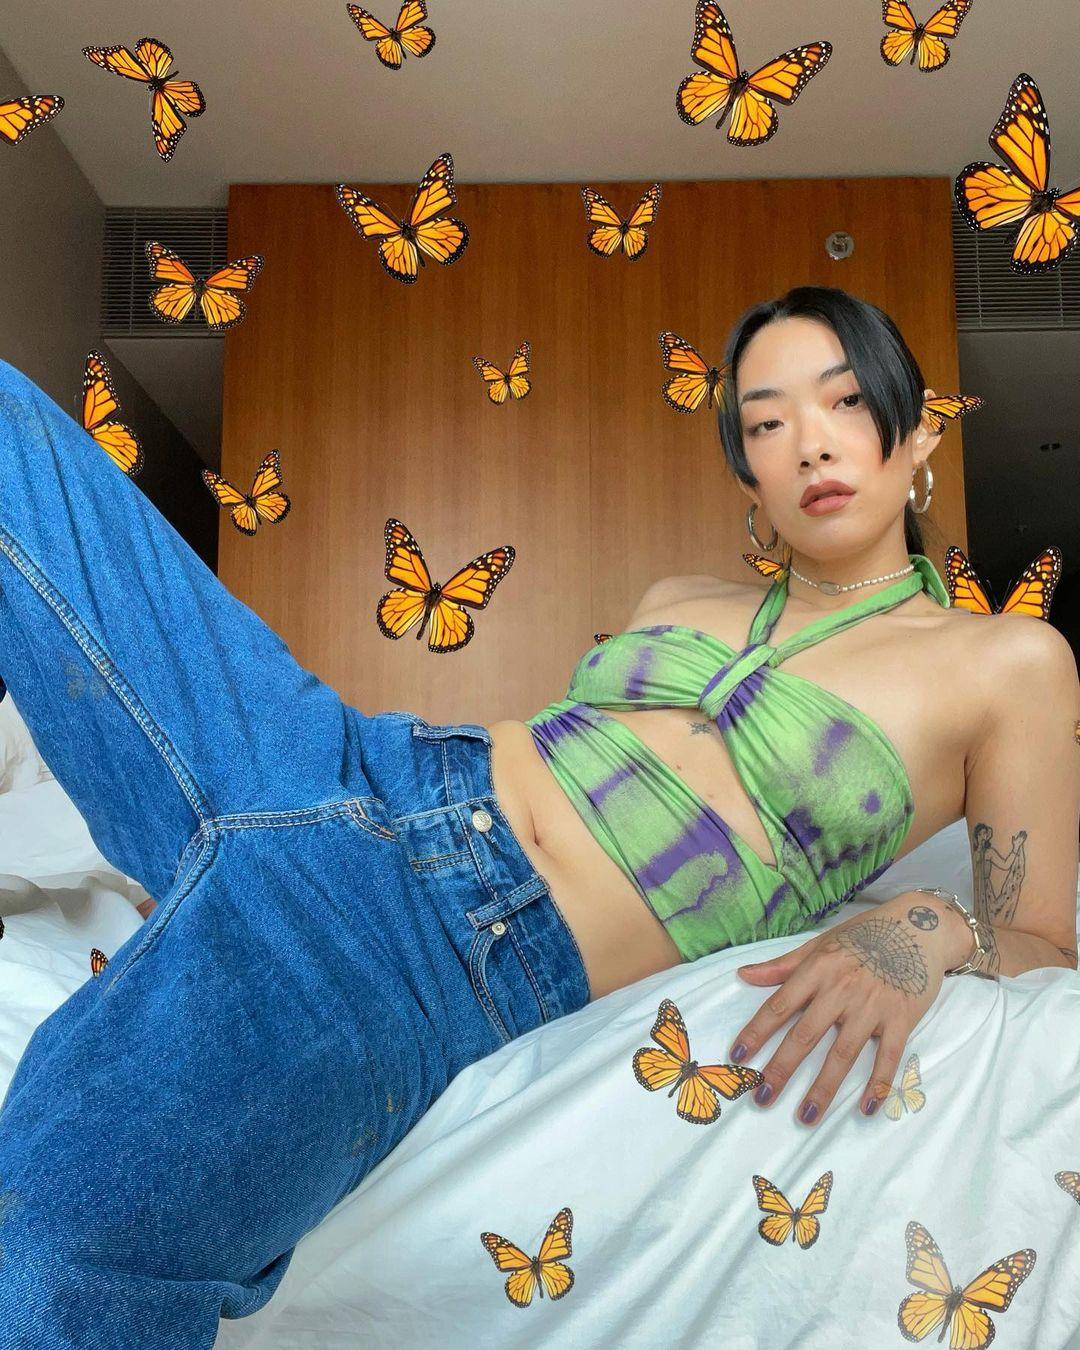 A photo showing musician, Rina Sawayama covered in butterfly prints